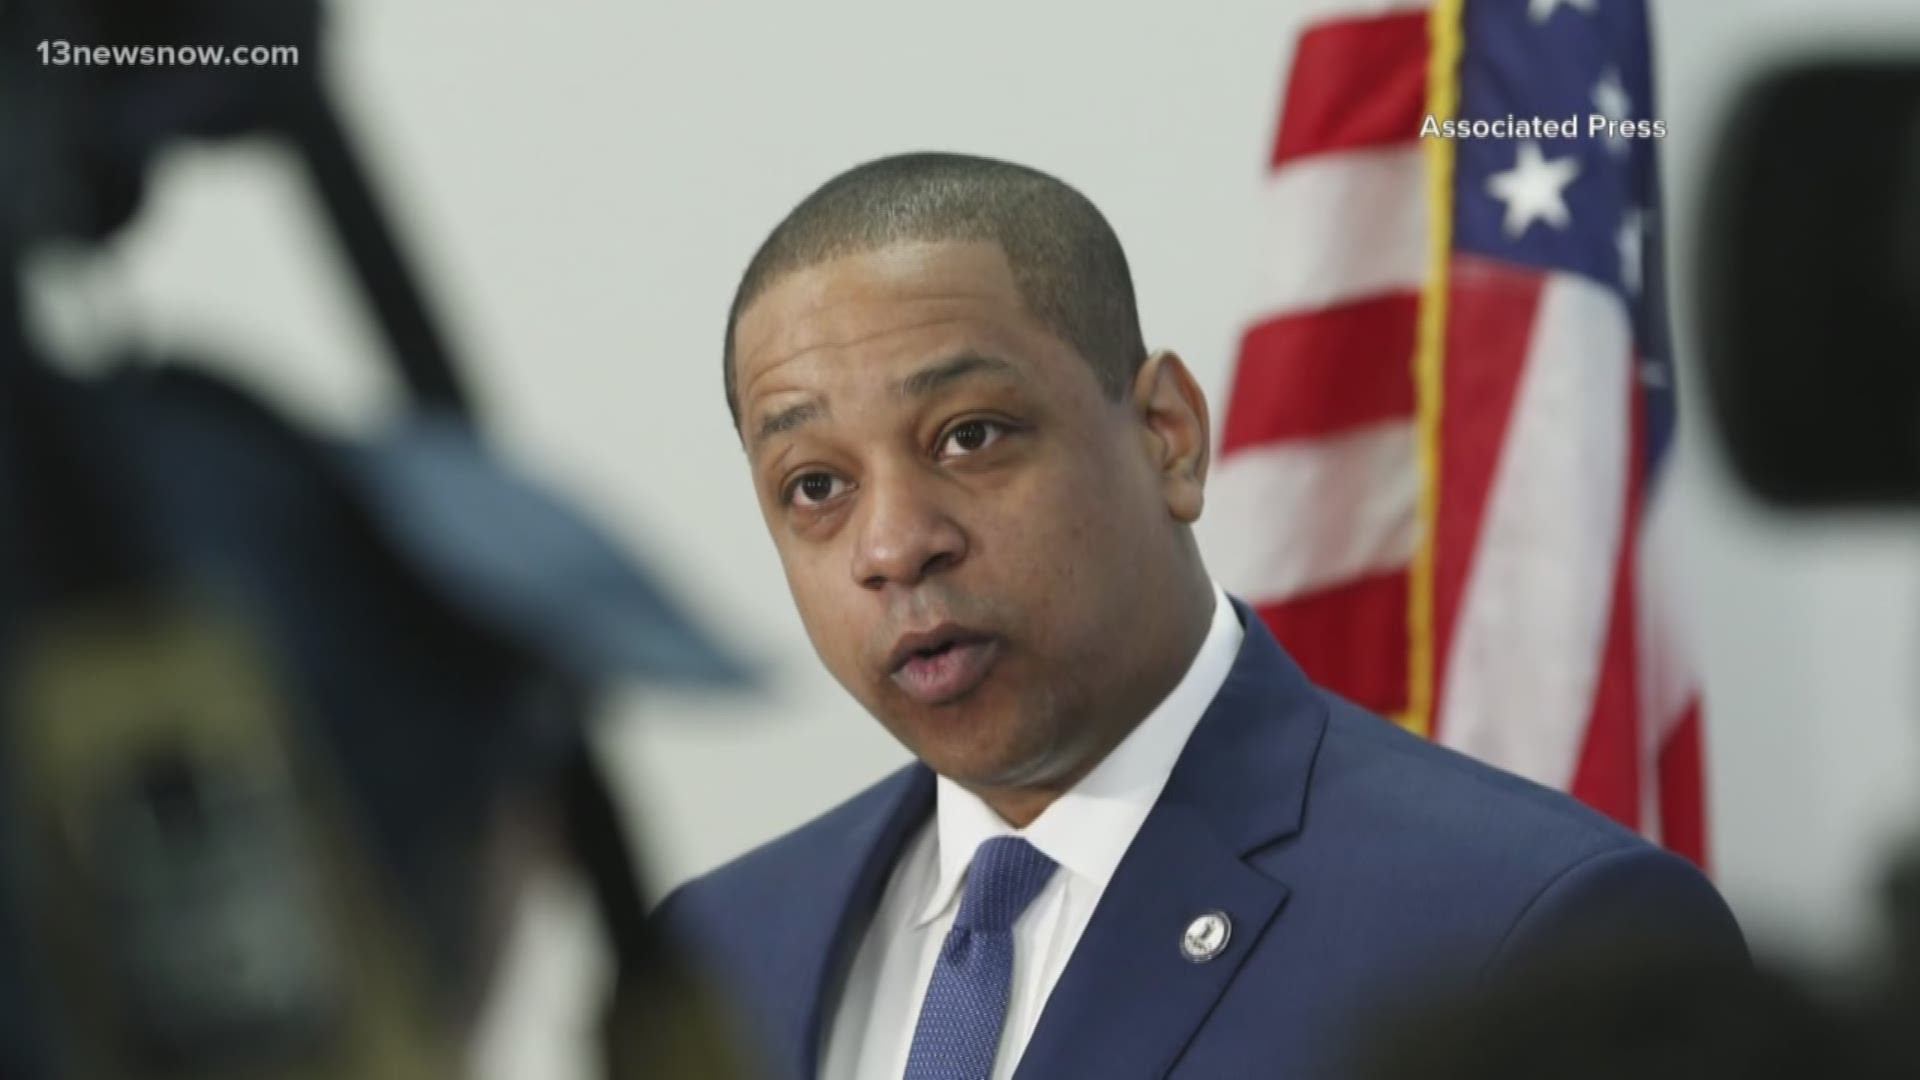 A judge has tossed out a libel lawsuit filed by Lt. Gov. Justin Fairfax against a television network he accused of slanted reporting on sexual assault allegations.